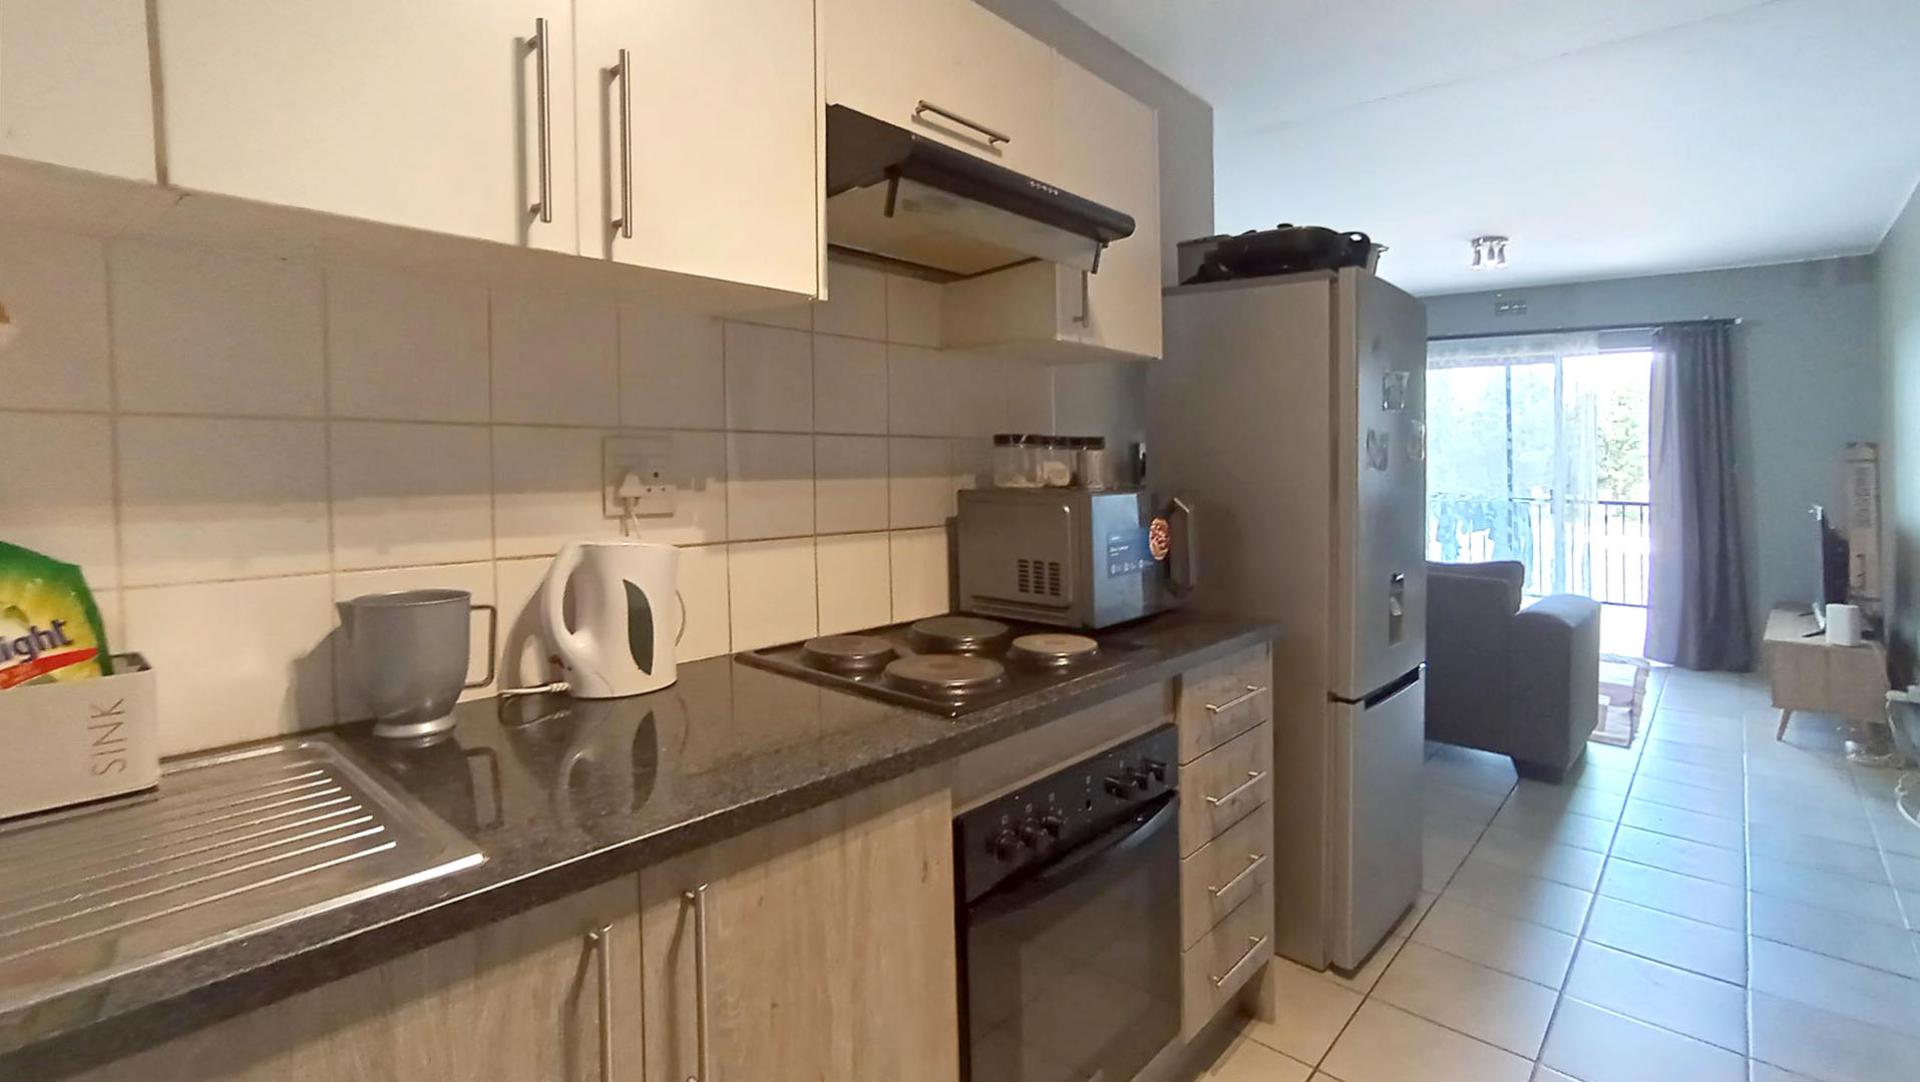 Kitchen - 8 square meters of property in Clubview